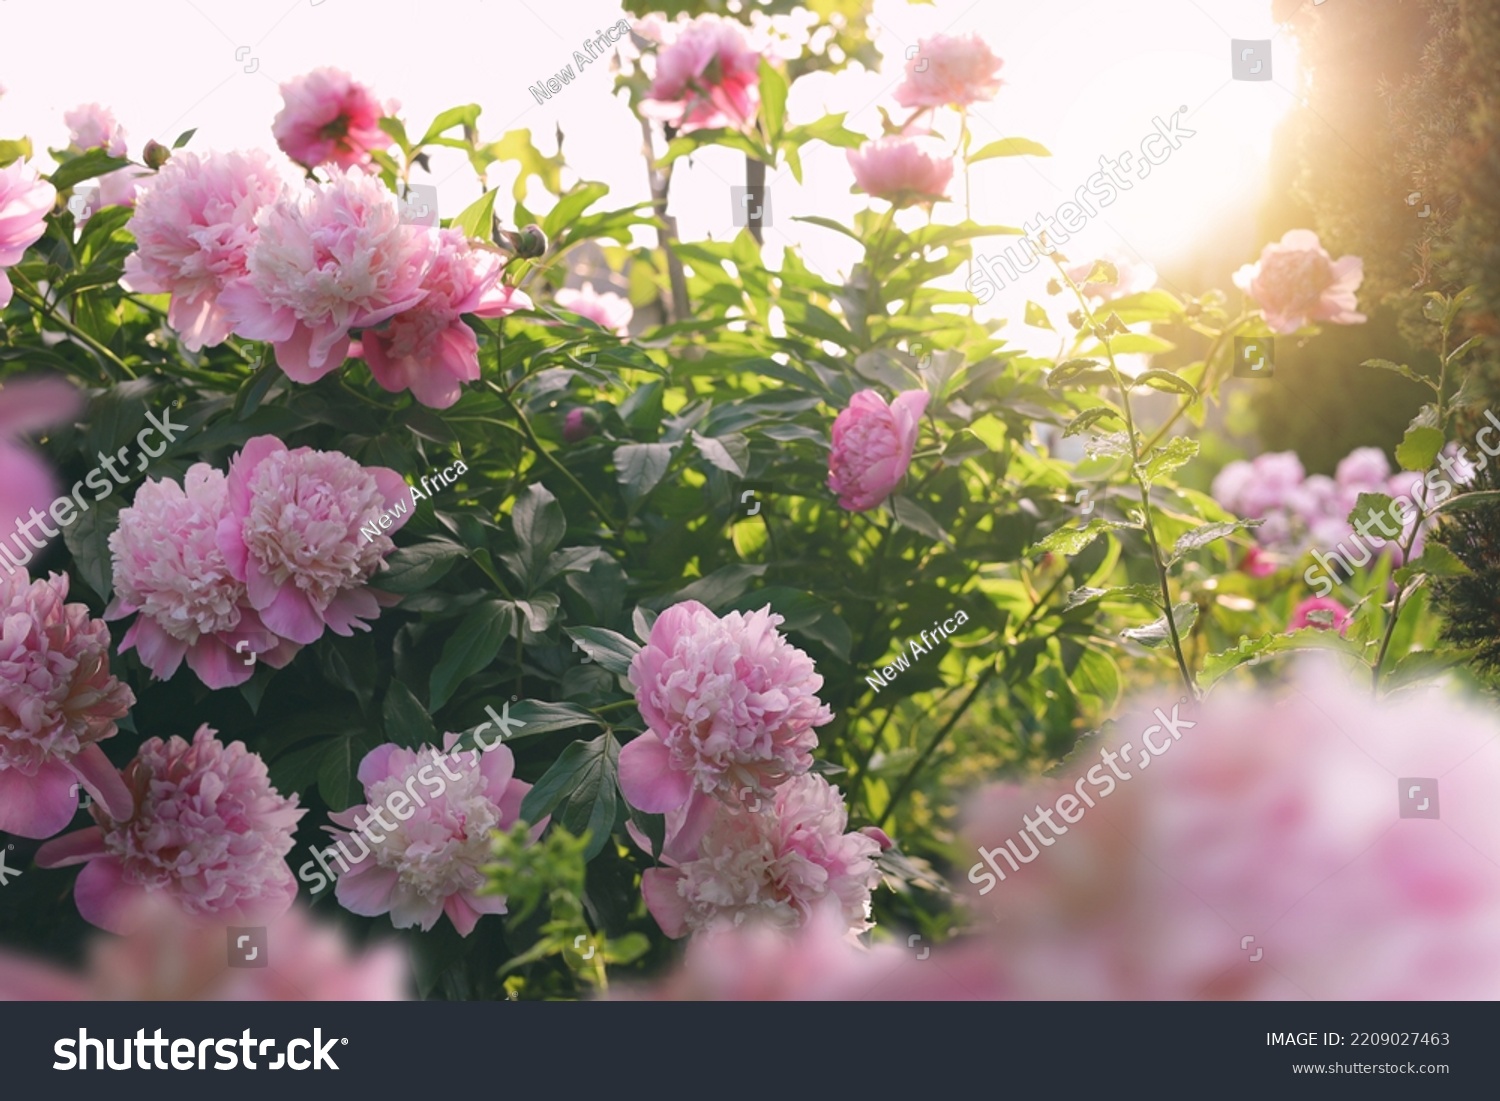 Blooming peony plant with beautiful pink flowers outdoors #2209027463